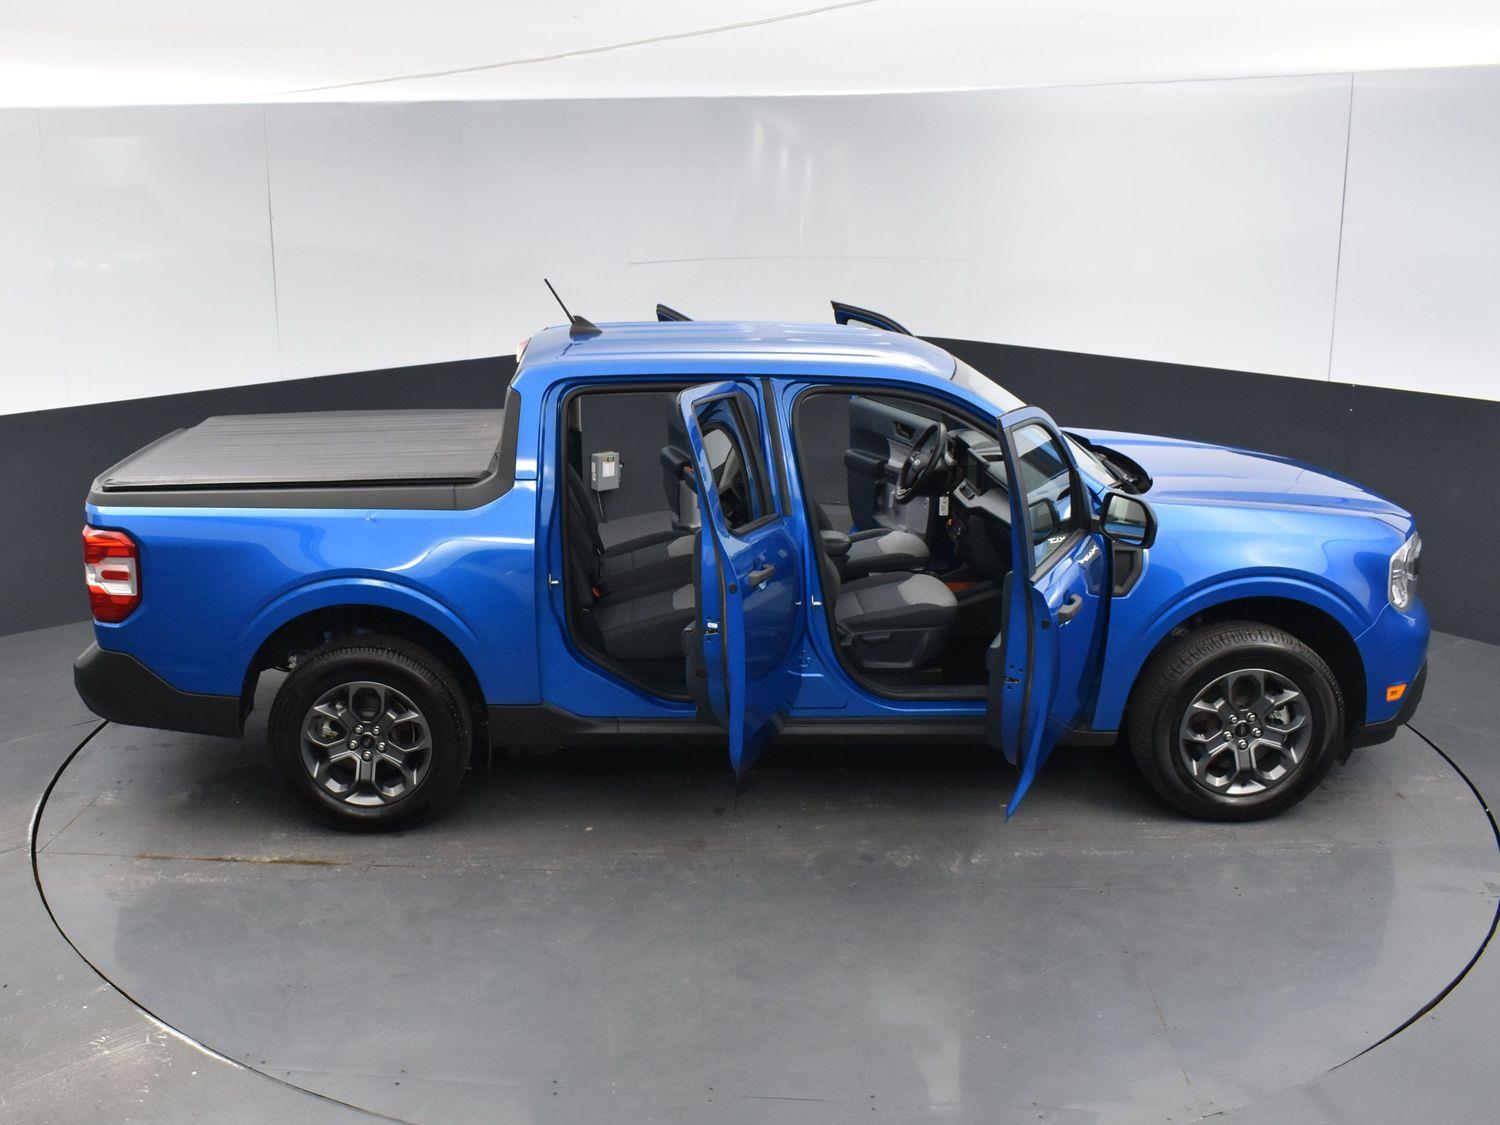 Used 2022 Ford Maverick XLT Crew Cab Truck for sale in Grand Island NE